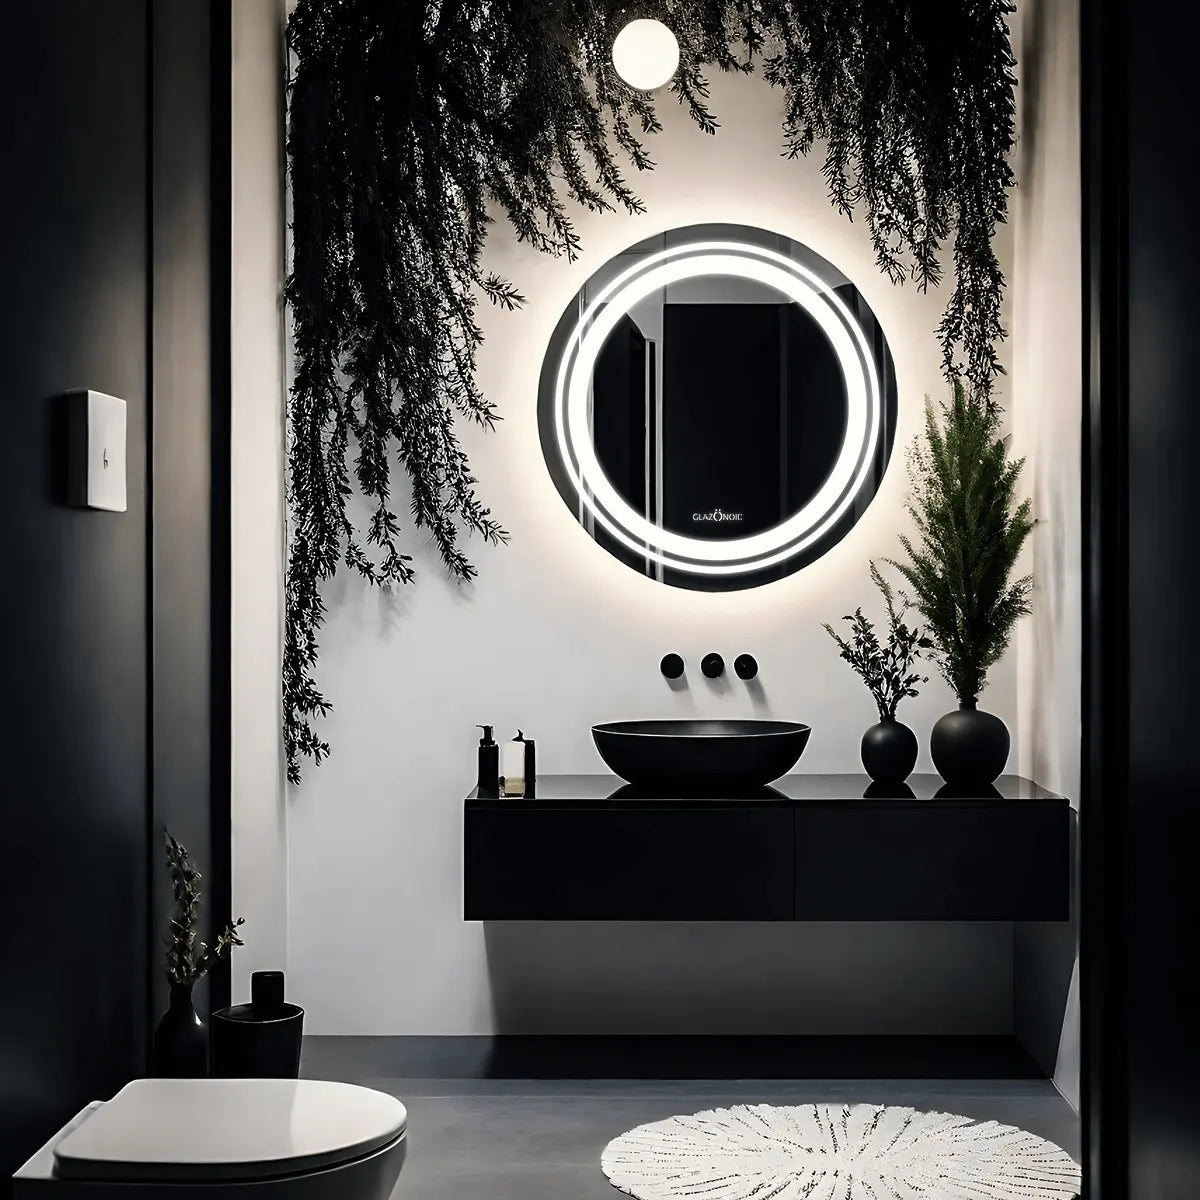 A close-up of a round bathroom LED mirror with a frameless design. The mirror is placed over the grey and black vanity which has a black ceramic sink and some plants with black pots. 